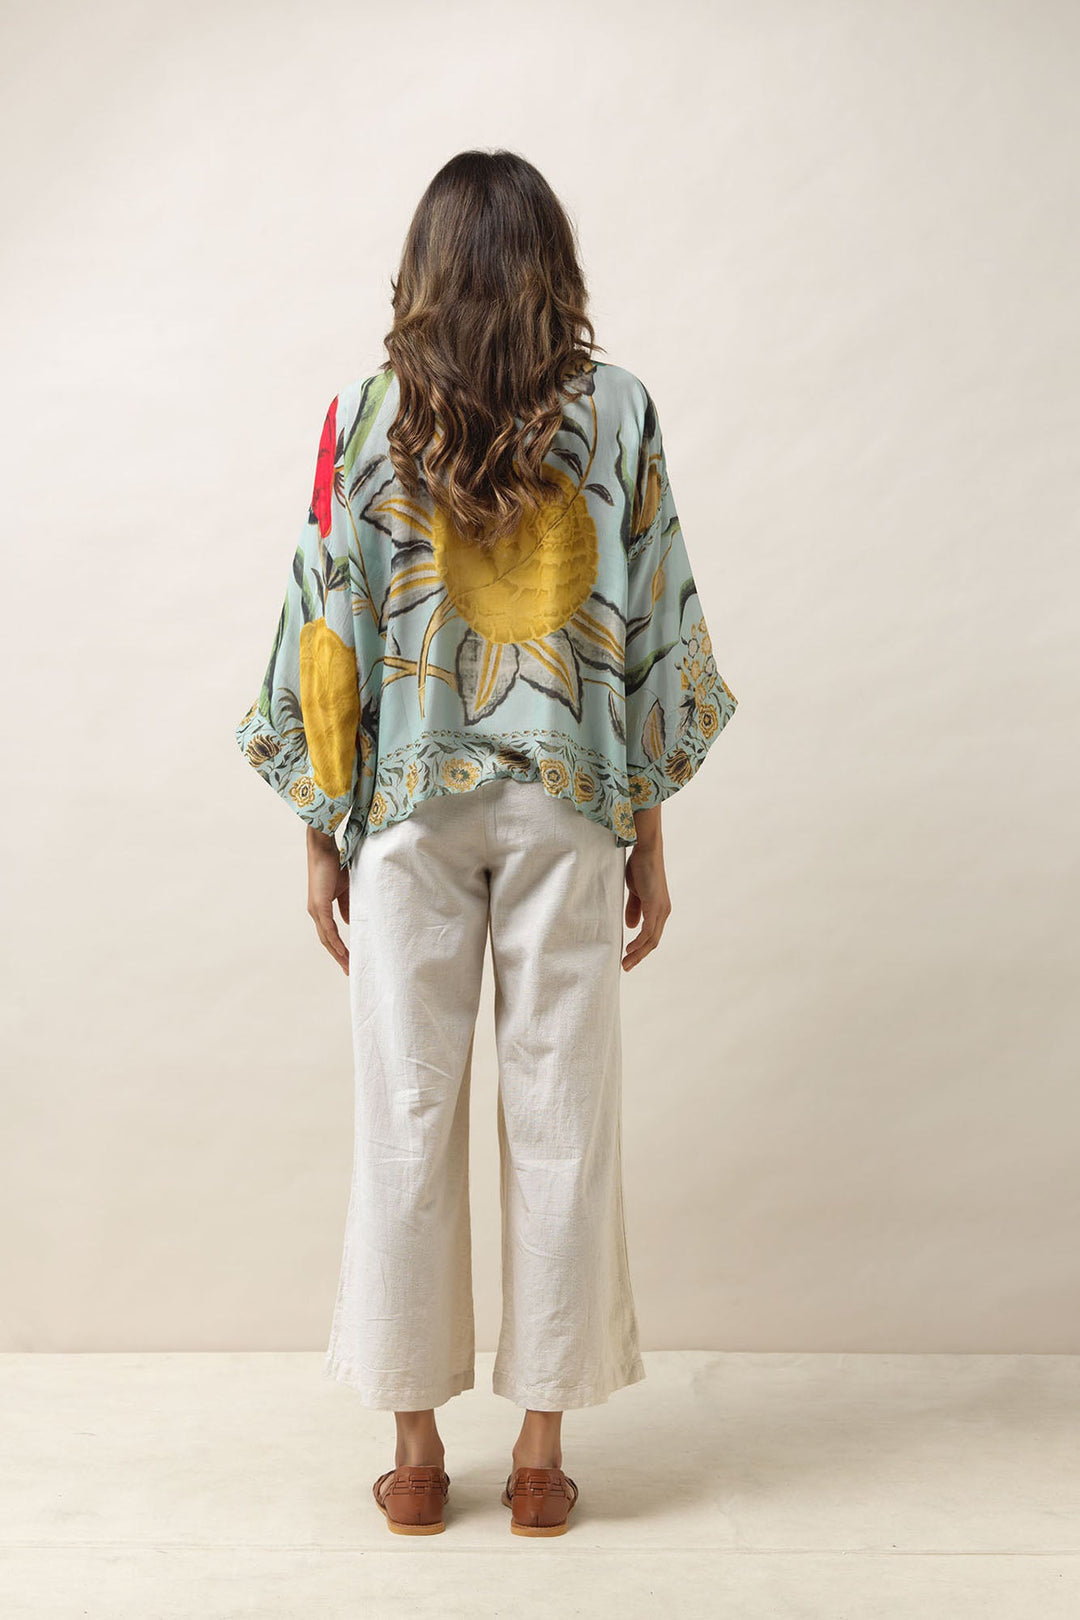 Women's short kimono in aqua with floral joy print by One Hundred Stars